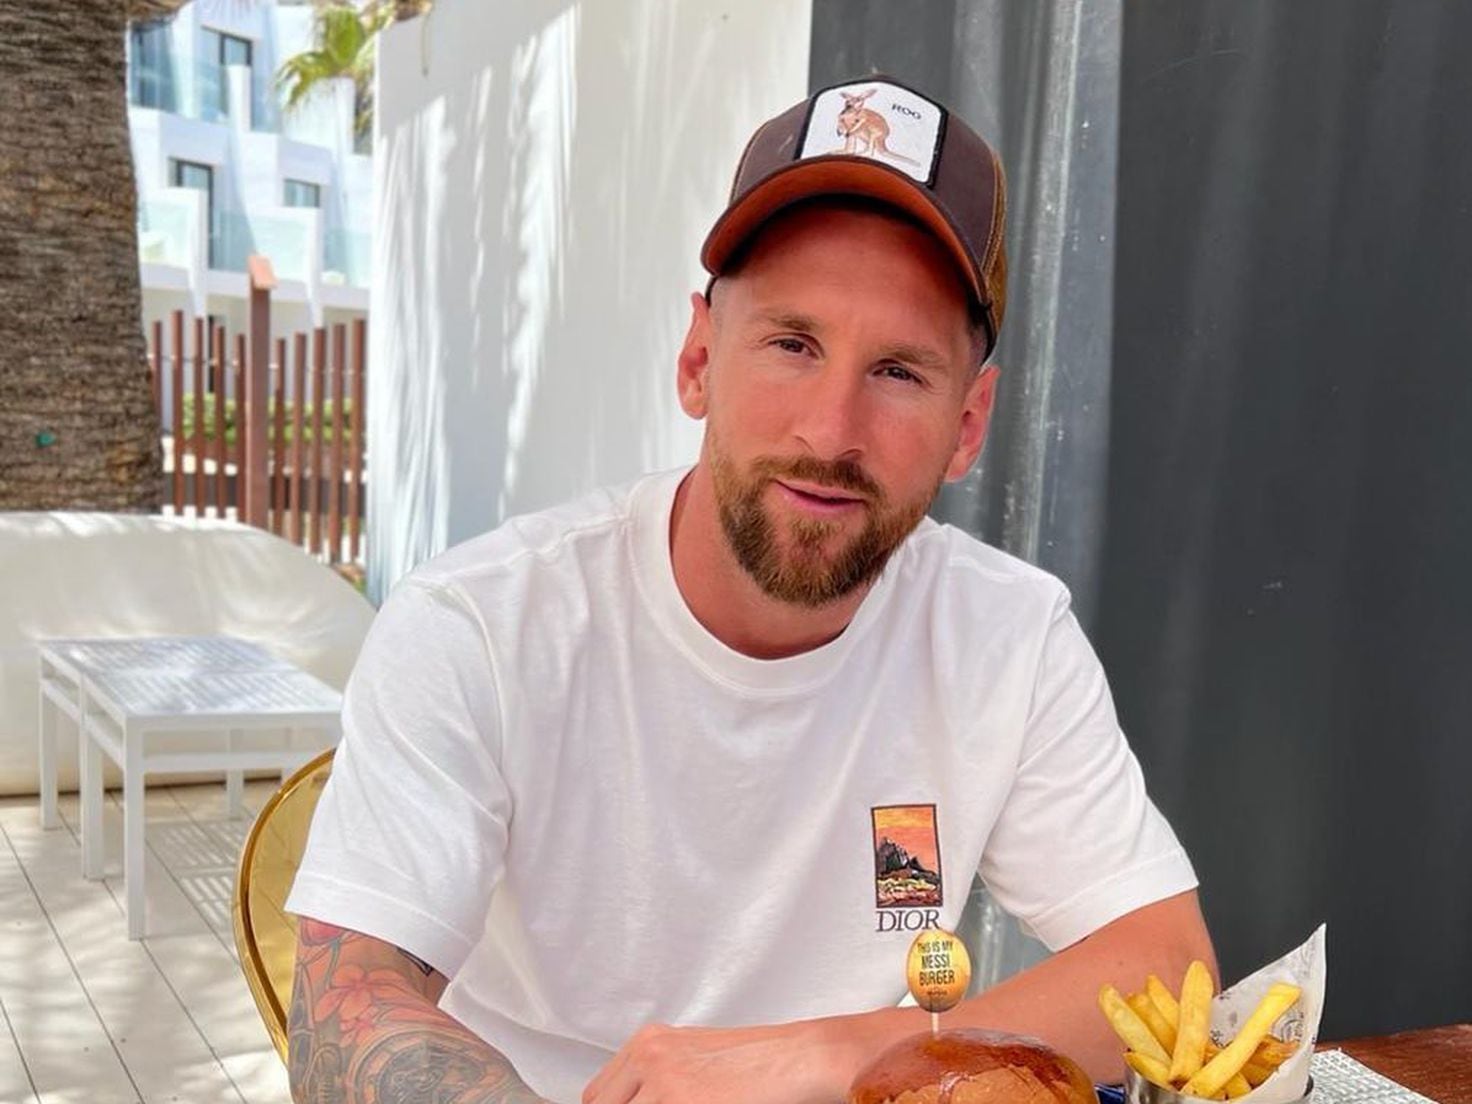 Messi pays homage in Ibiza by trying a dish with his name on it - AS USA